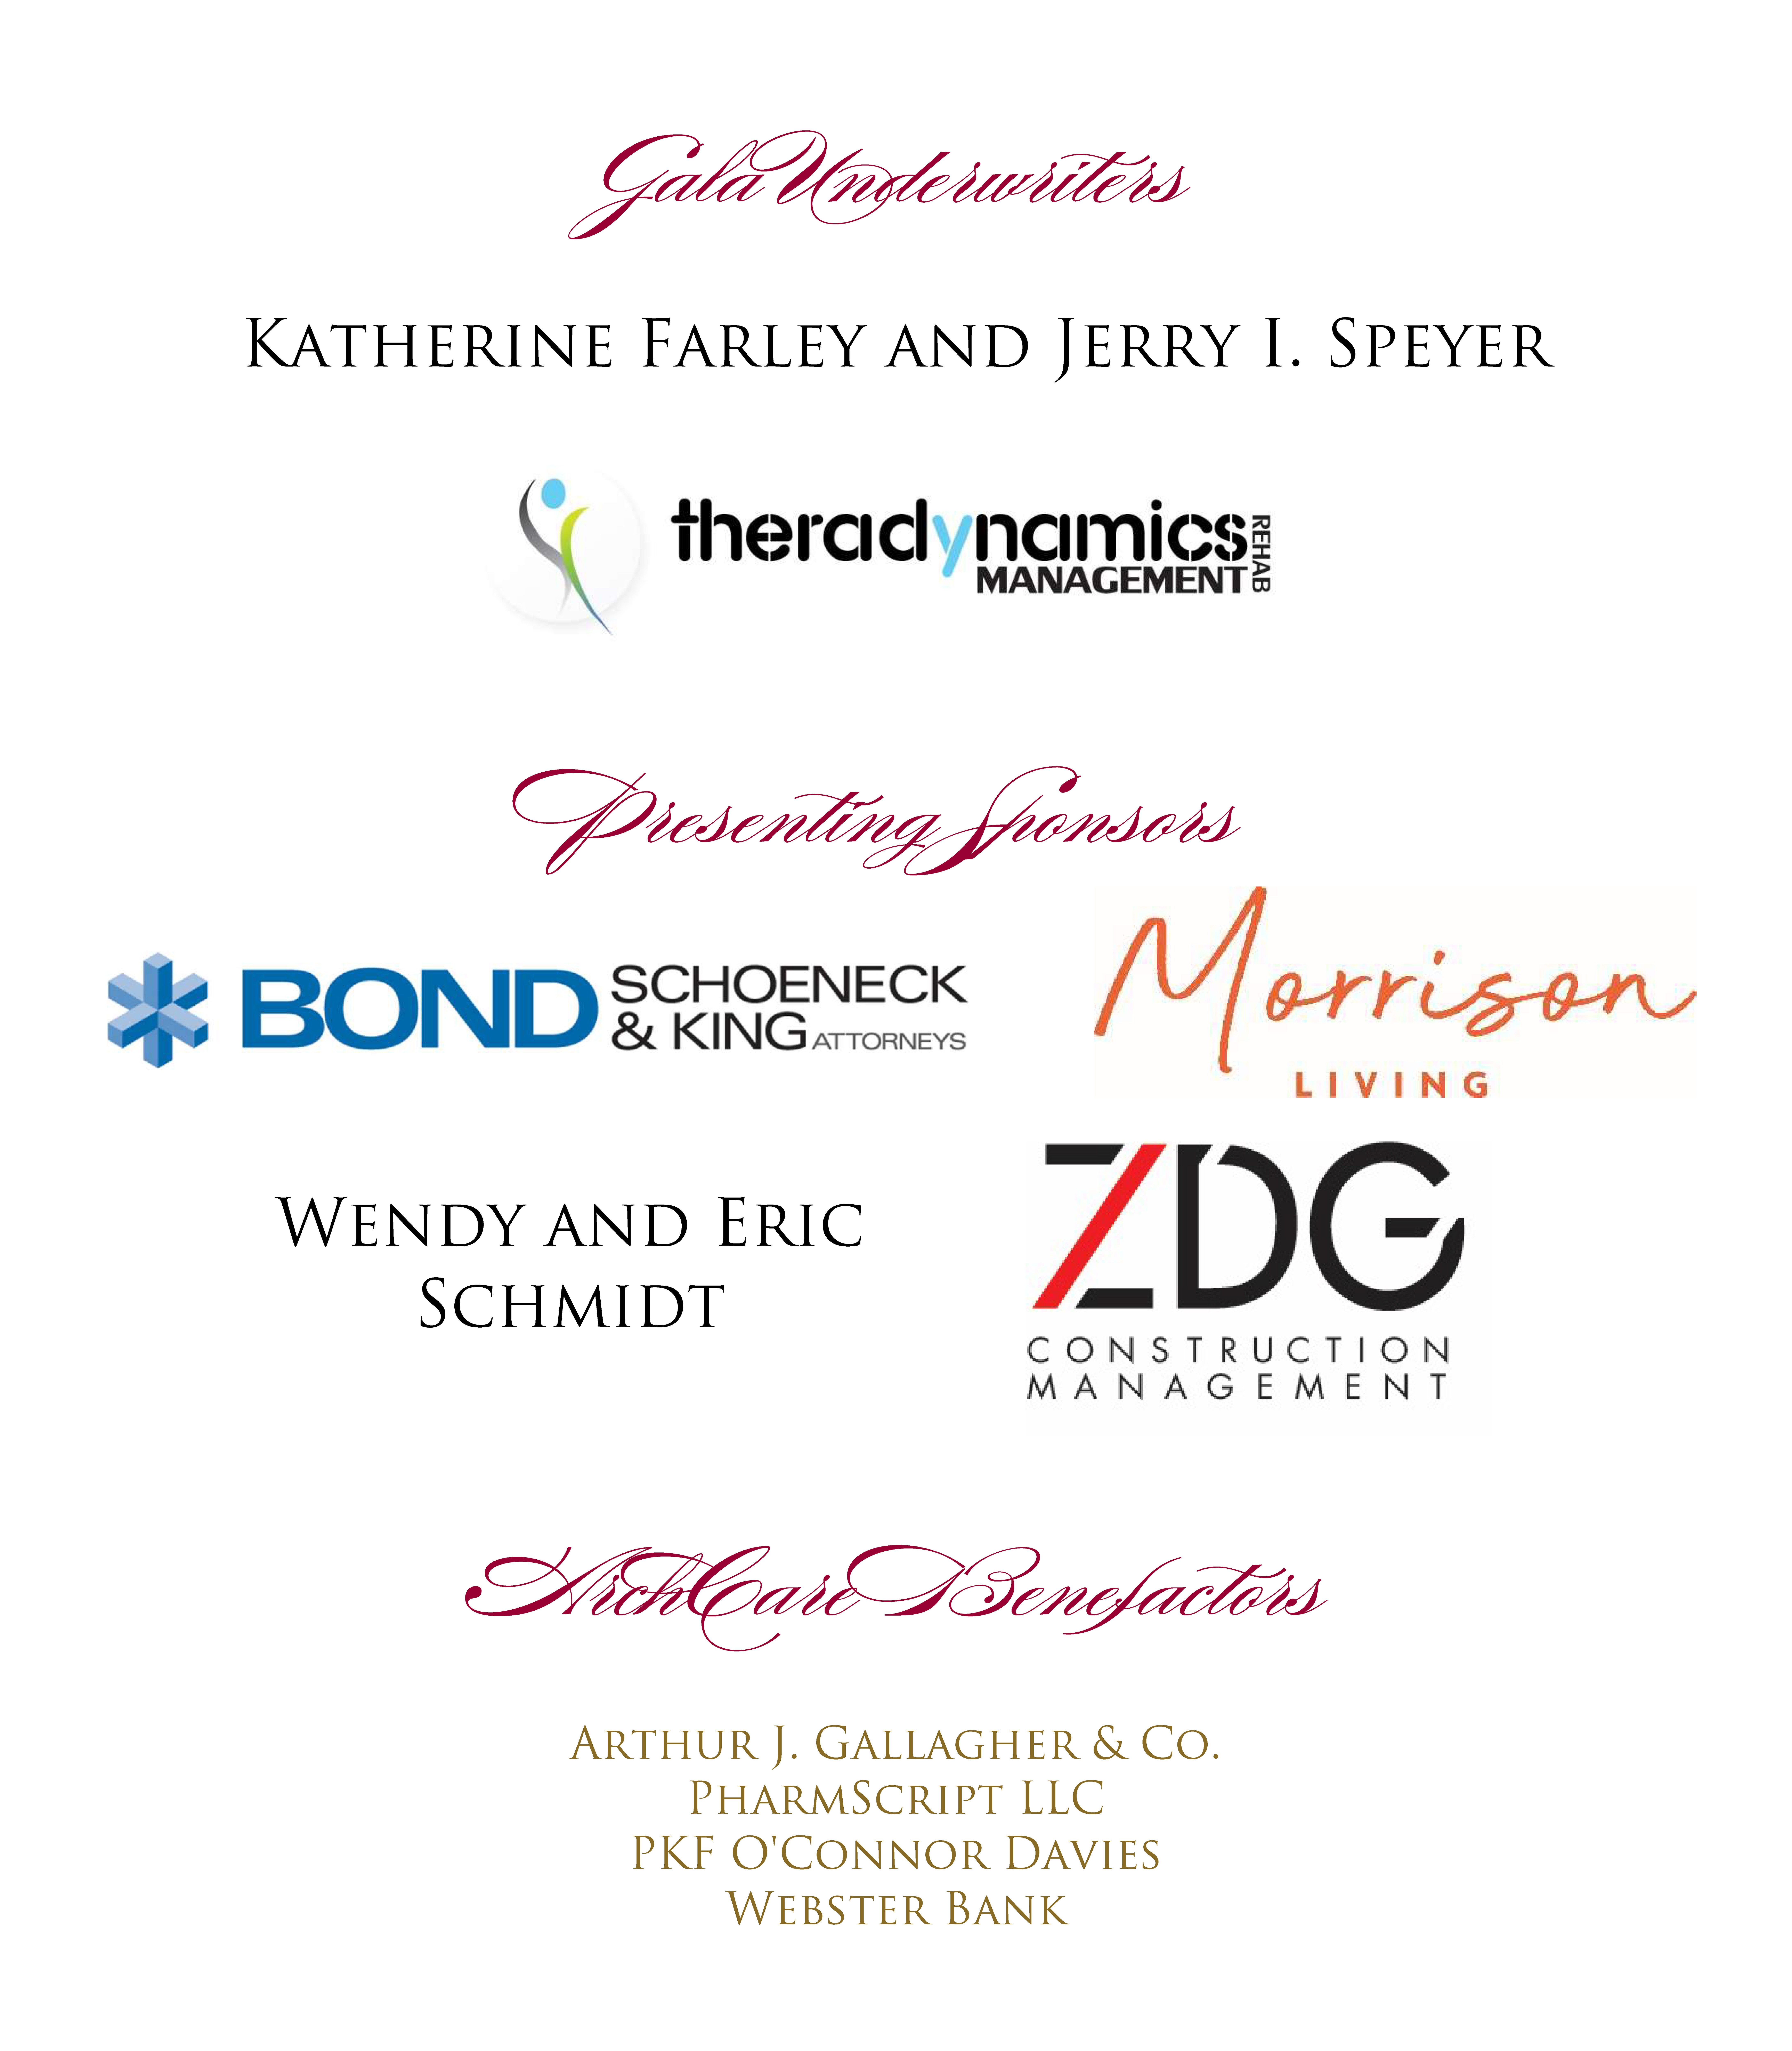 Archcare Gala donors